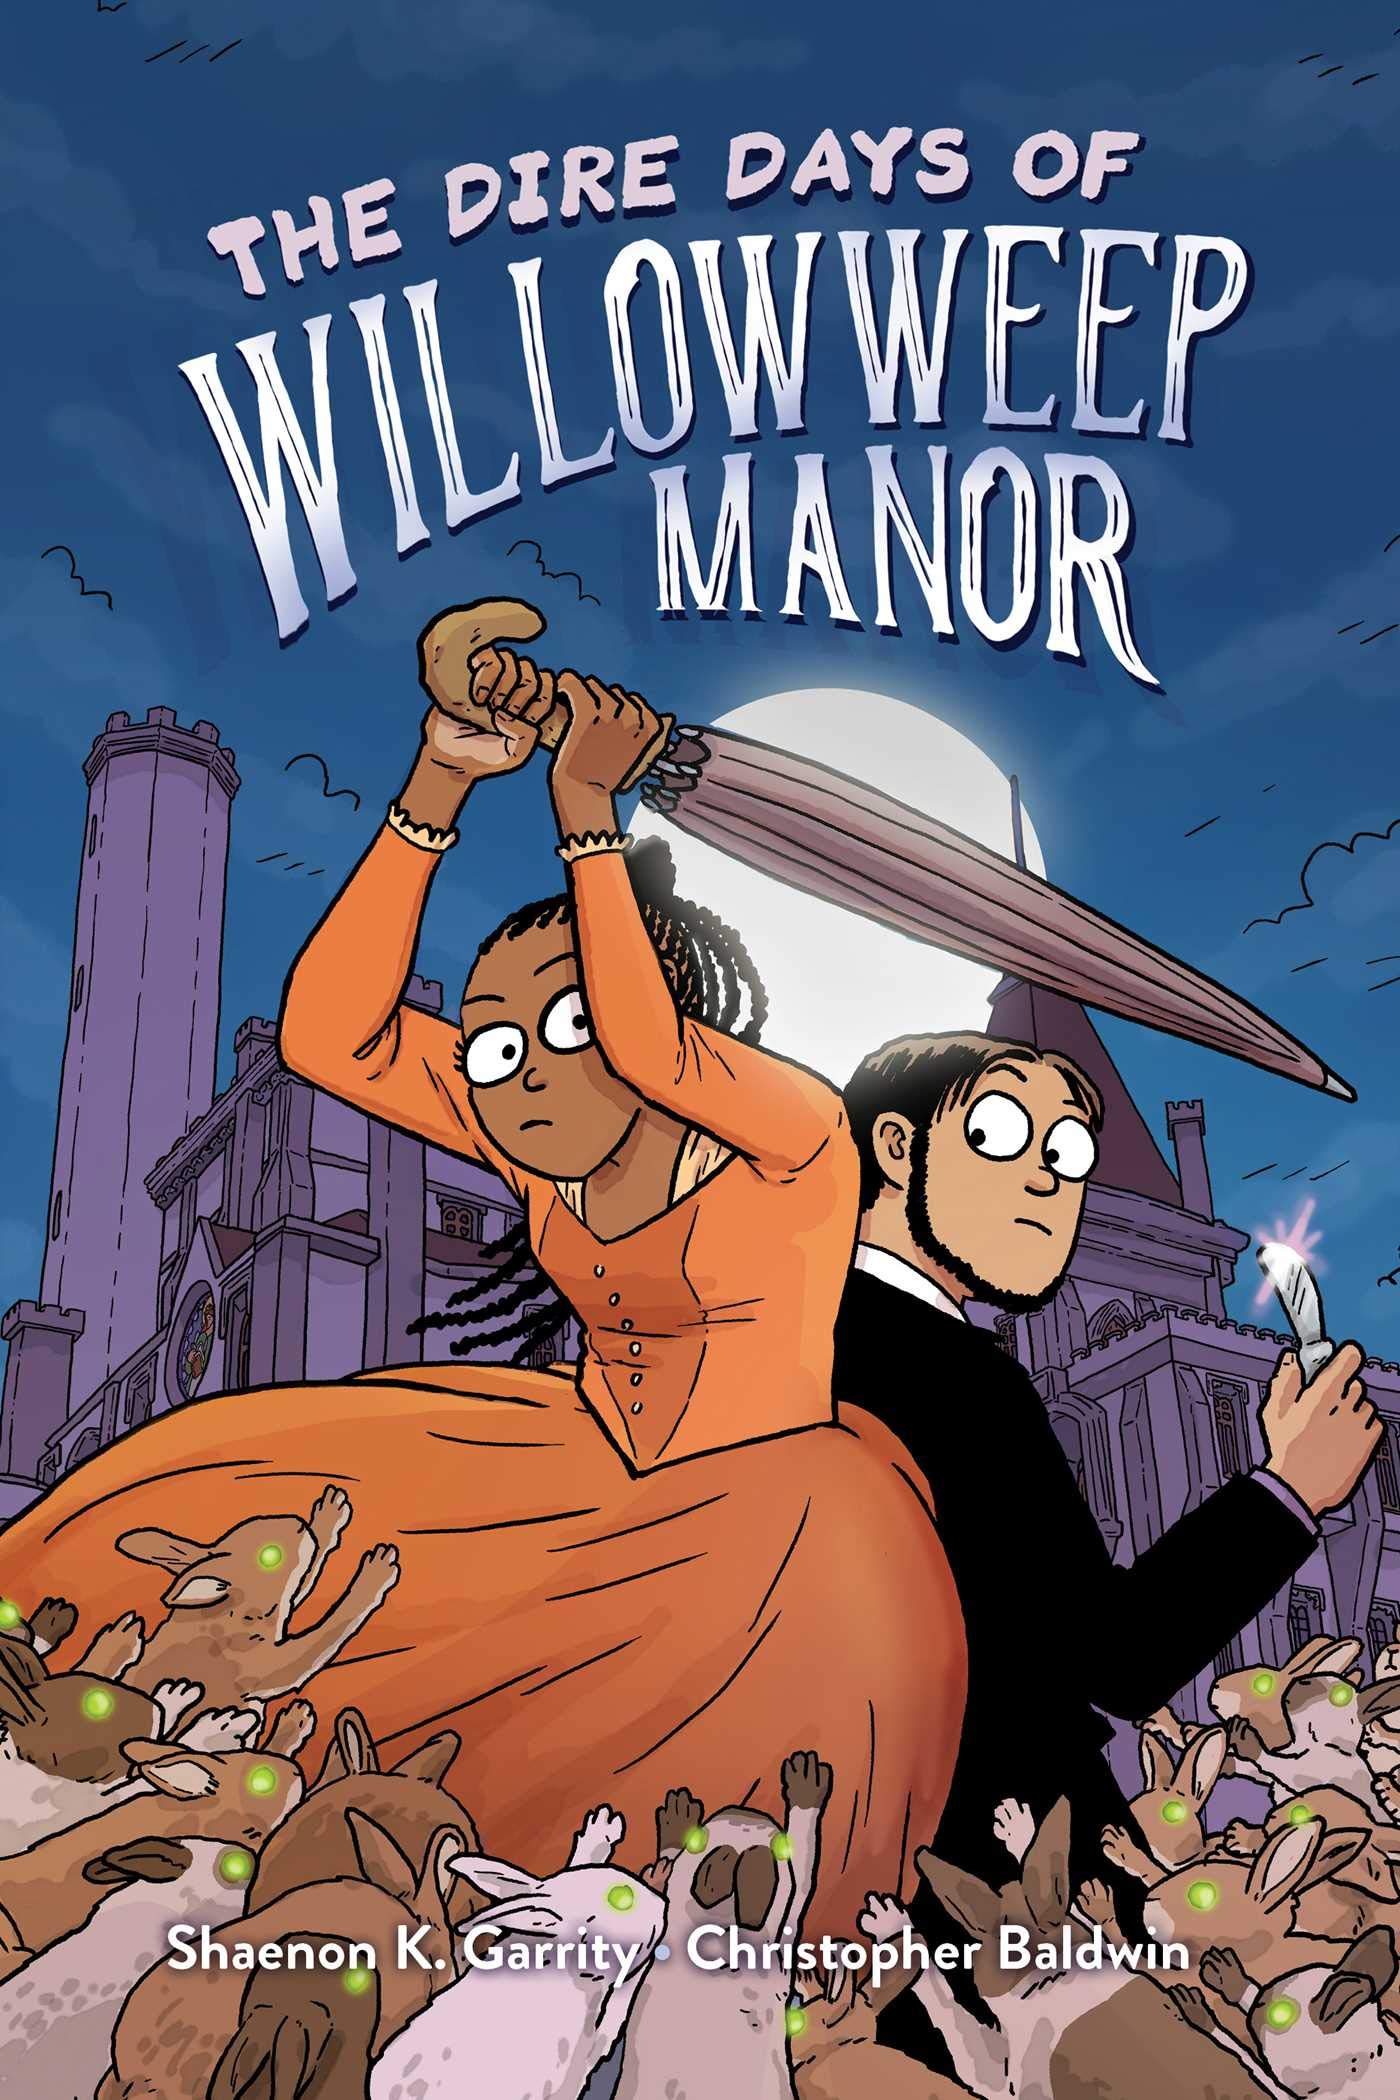 Image for "The Dire Days of Willowweep Manor"